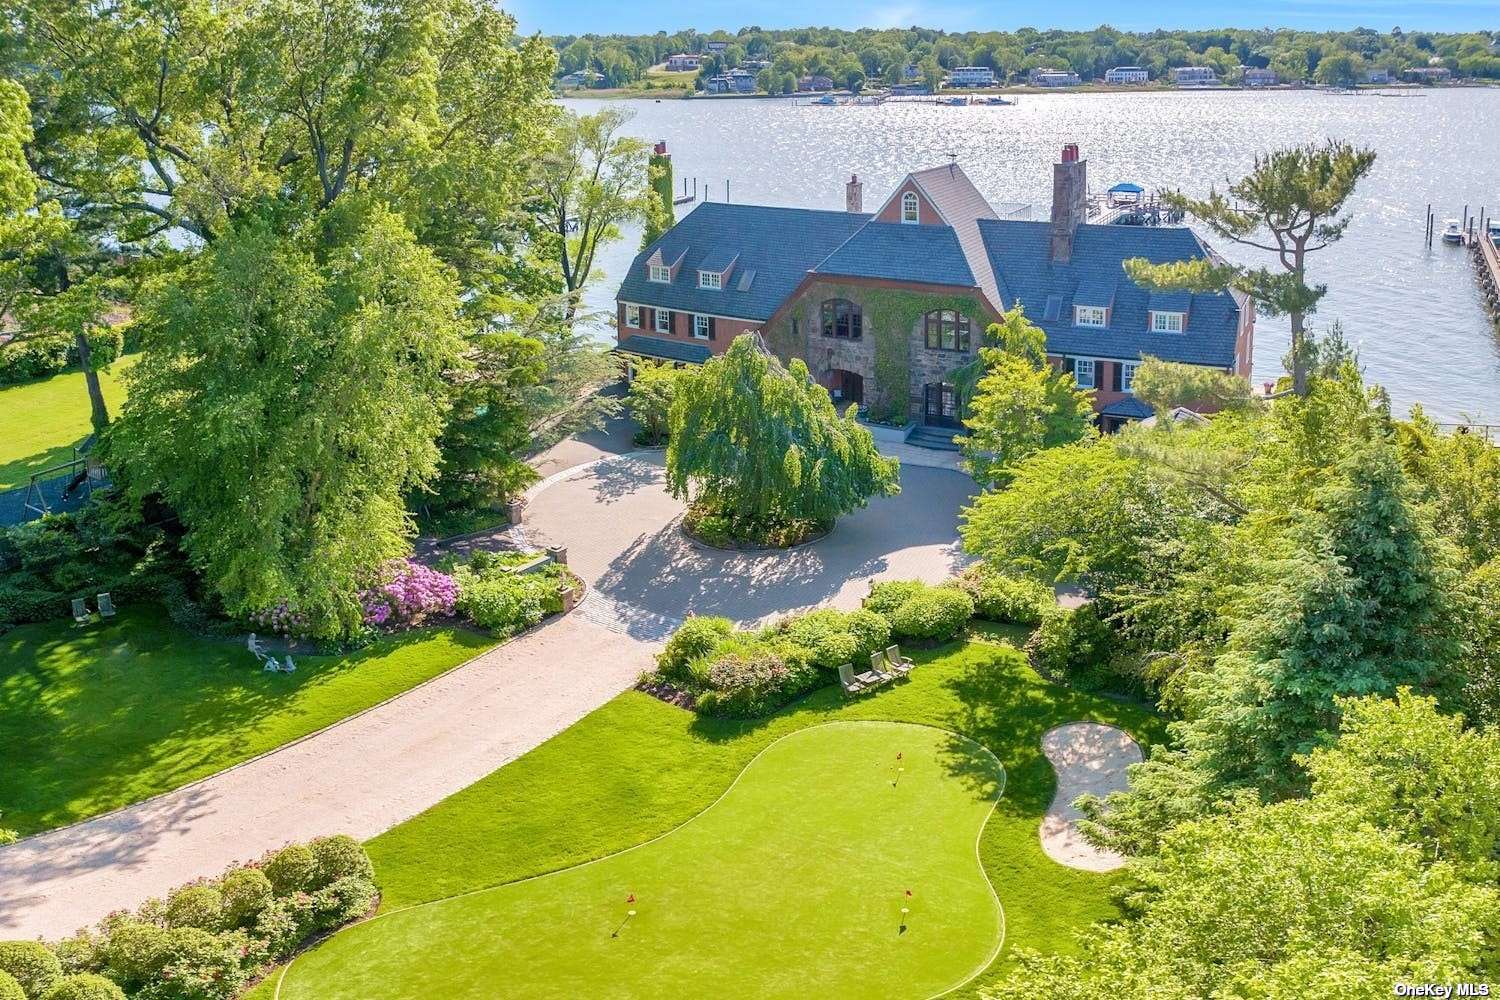 a aerial view of a house with a garden and lake view